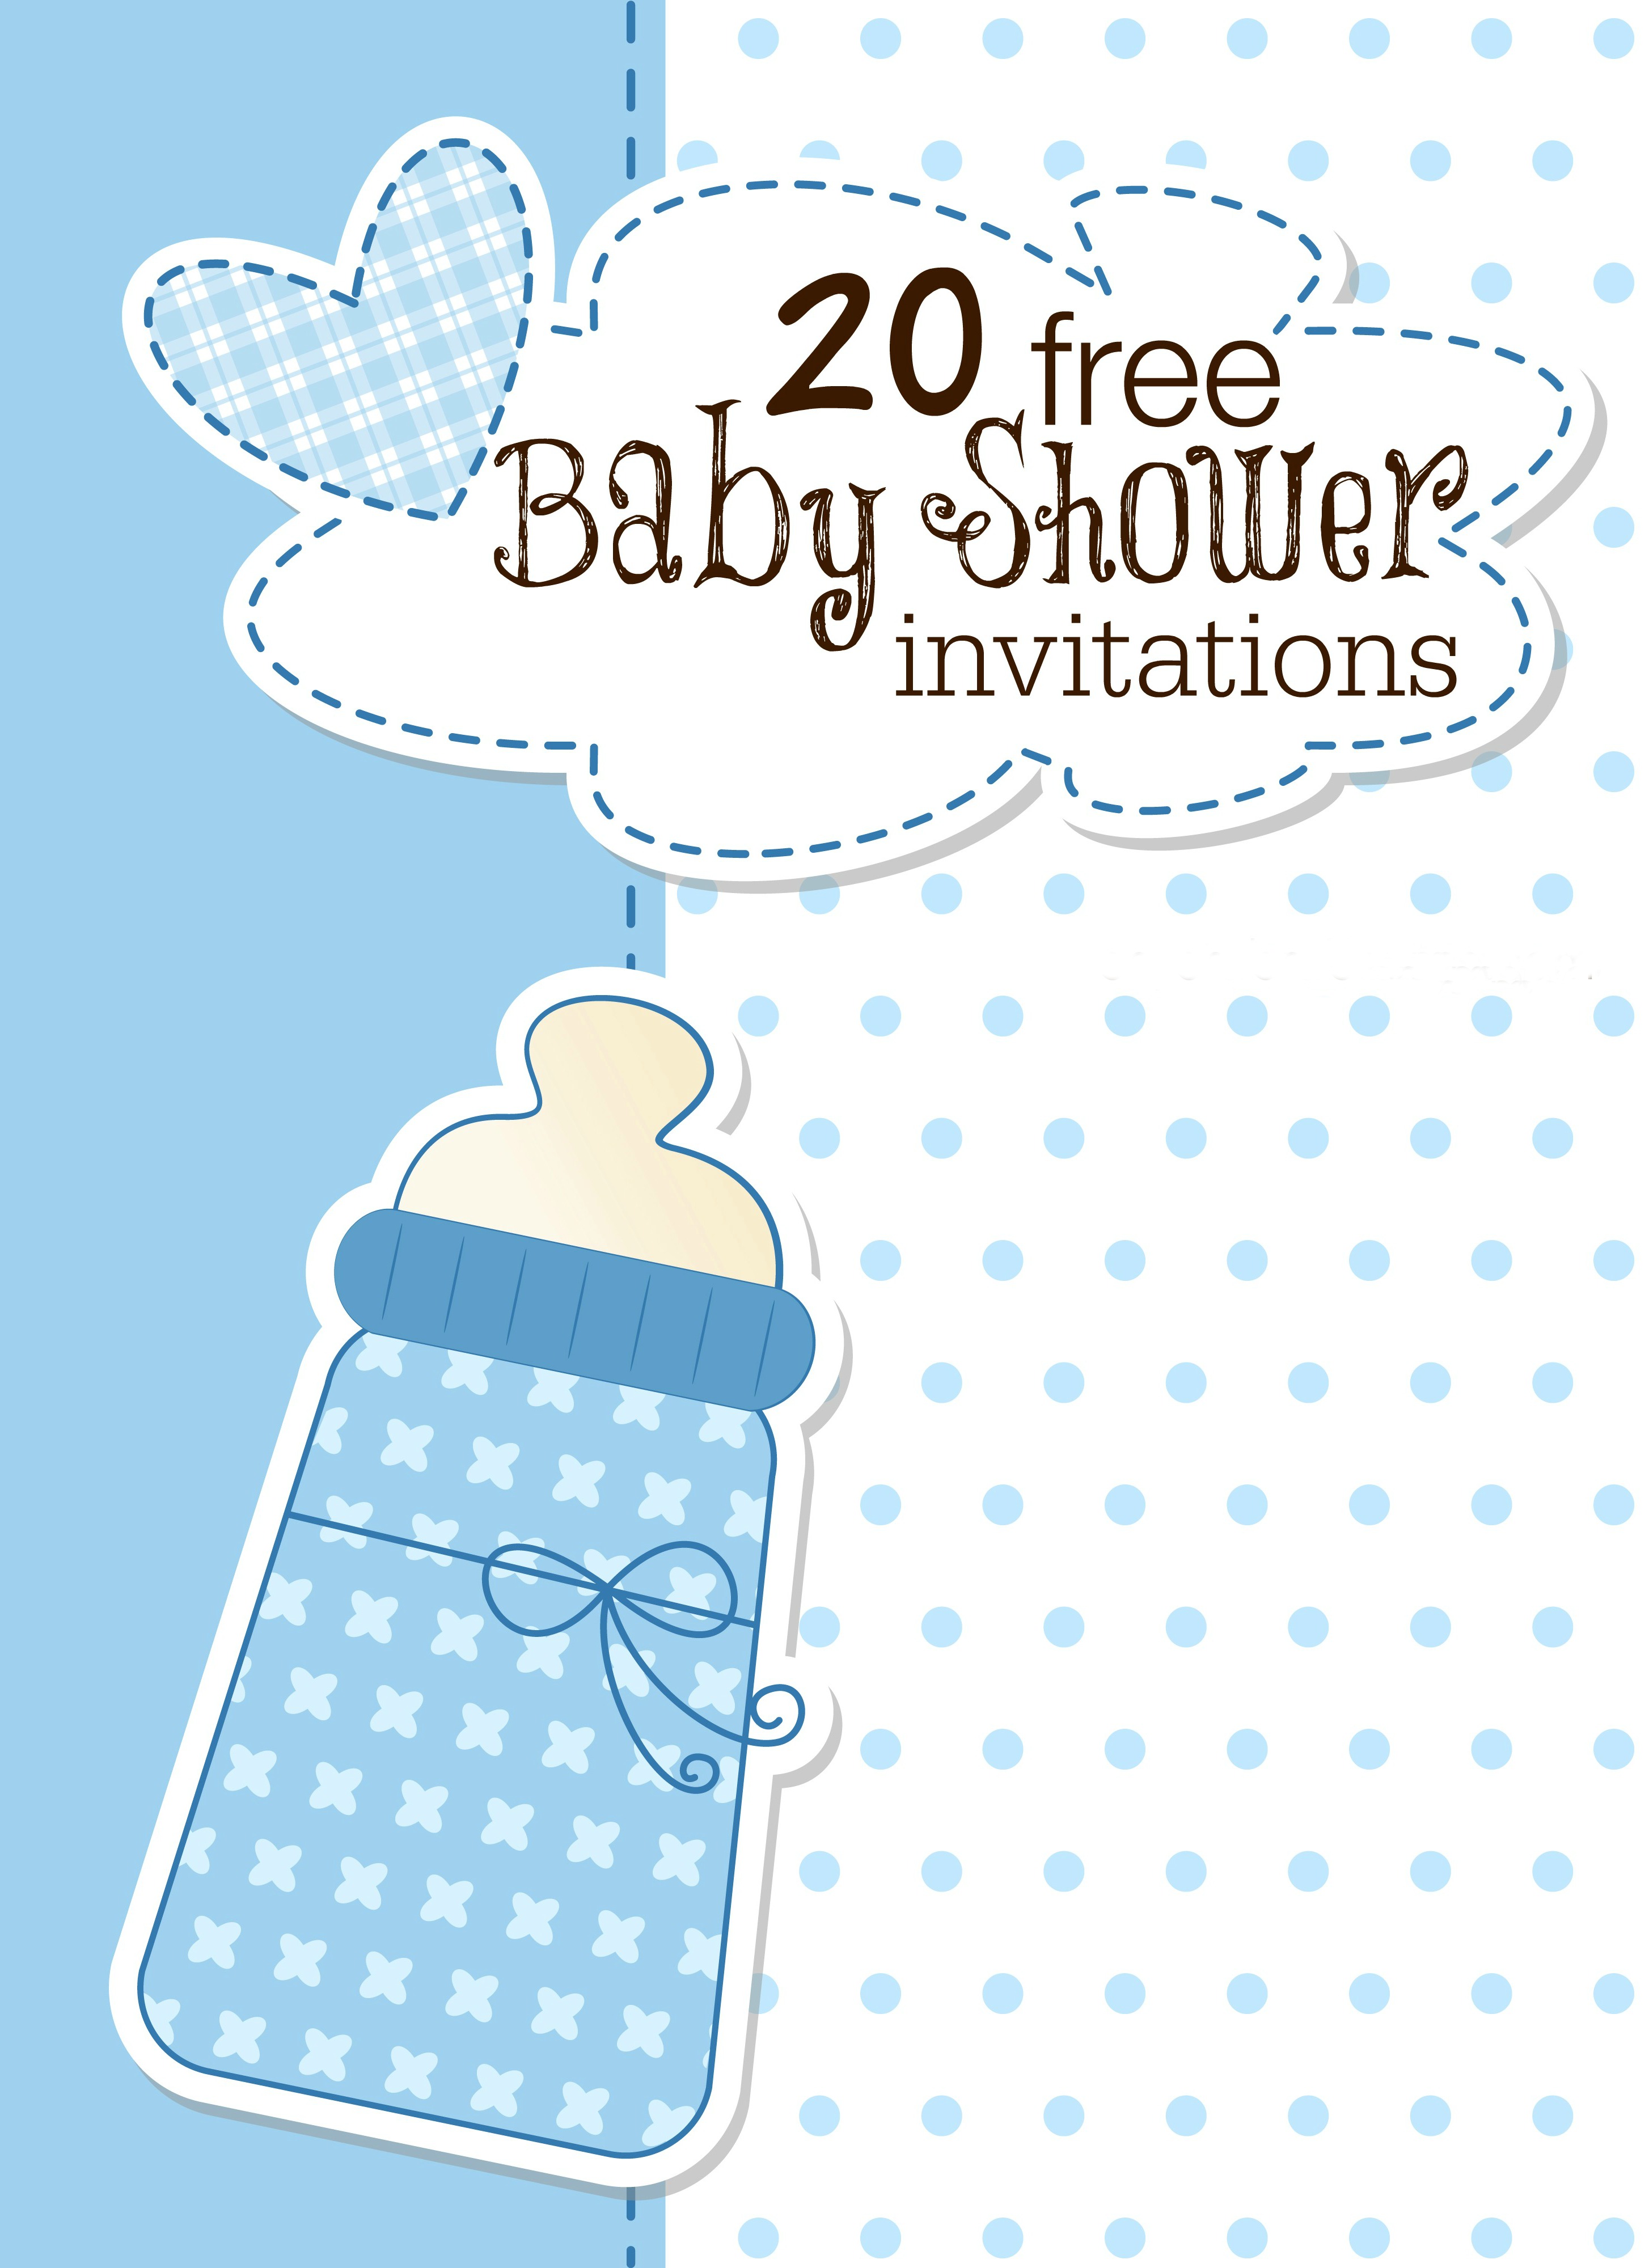 Full Size of Baby Shower:nautical Baby Shower Invitations For Boys Baby Girl Themes For Bedroom Baby Shower Ideas Baby Shower Decorations Themes For Baby Girl Nursery Nautical Baby Shower Invitations For Boys Baby Girl Themes For Bedroom Baby Shower Ideas Baby Shower Decorations Themes For Baby Girl Nursery